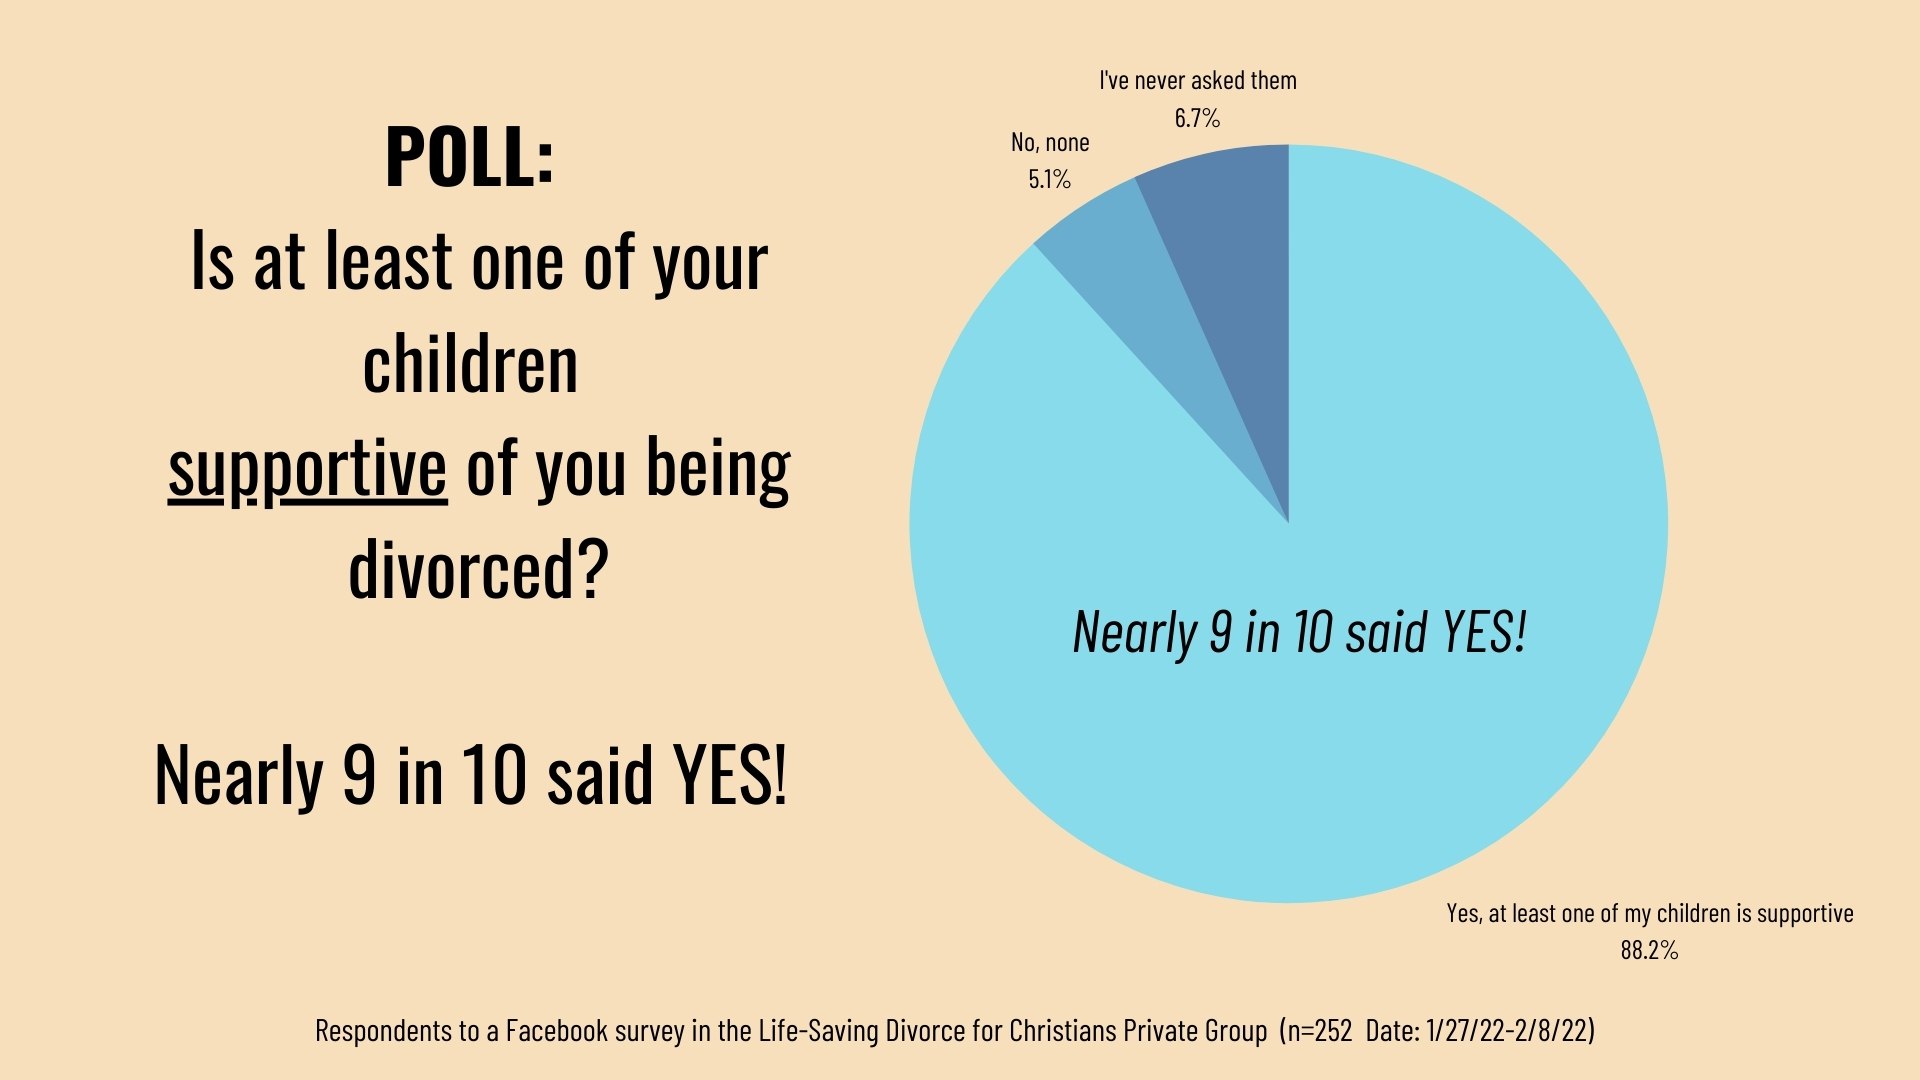 POLL: Is at least one of your children supportive of you being divorced? Nearly 9 in 10 said YES!